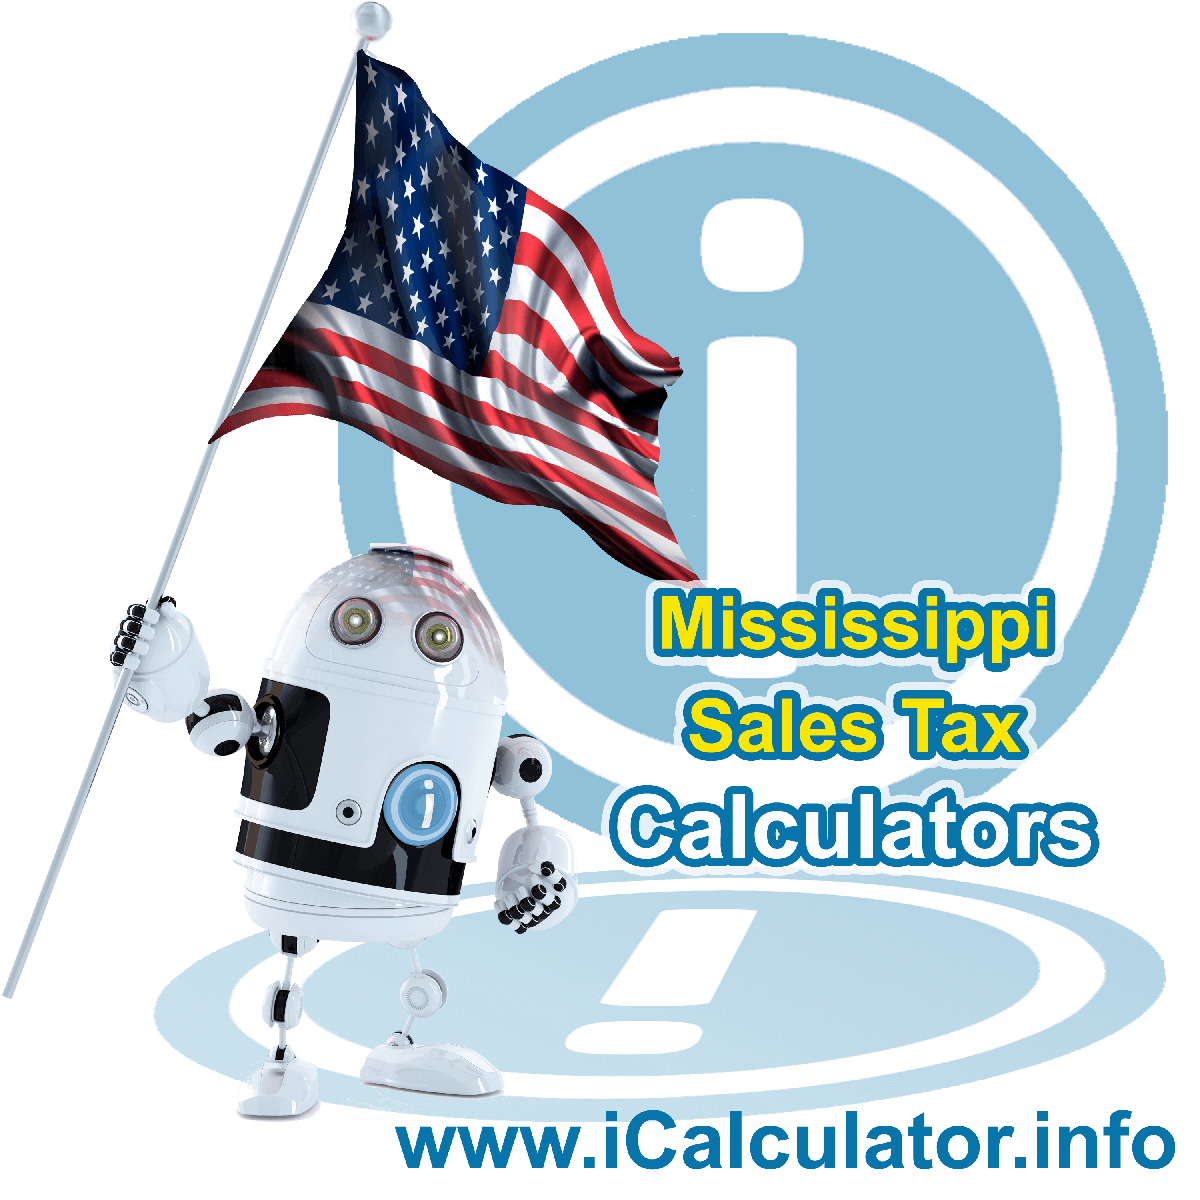 Mississippi Sales Tax Comparison Calculator: This image illustrates a calculator robot comparing sales tax in Mississippi manually using the Mississippi Sales Tax Formula. You can use this information to compare Sales Tax manually or use the Mississippi Sales Tax Comparison Calculator to calculate and compare Mississippi sales tax online.